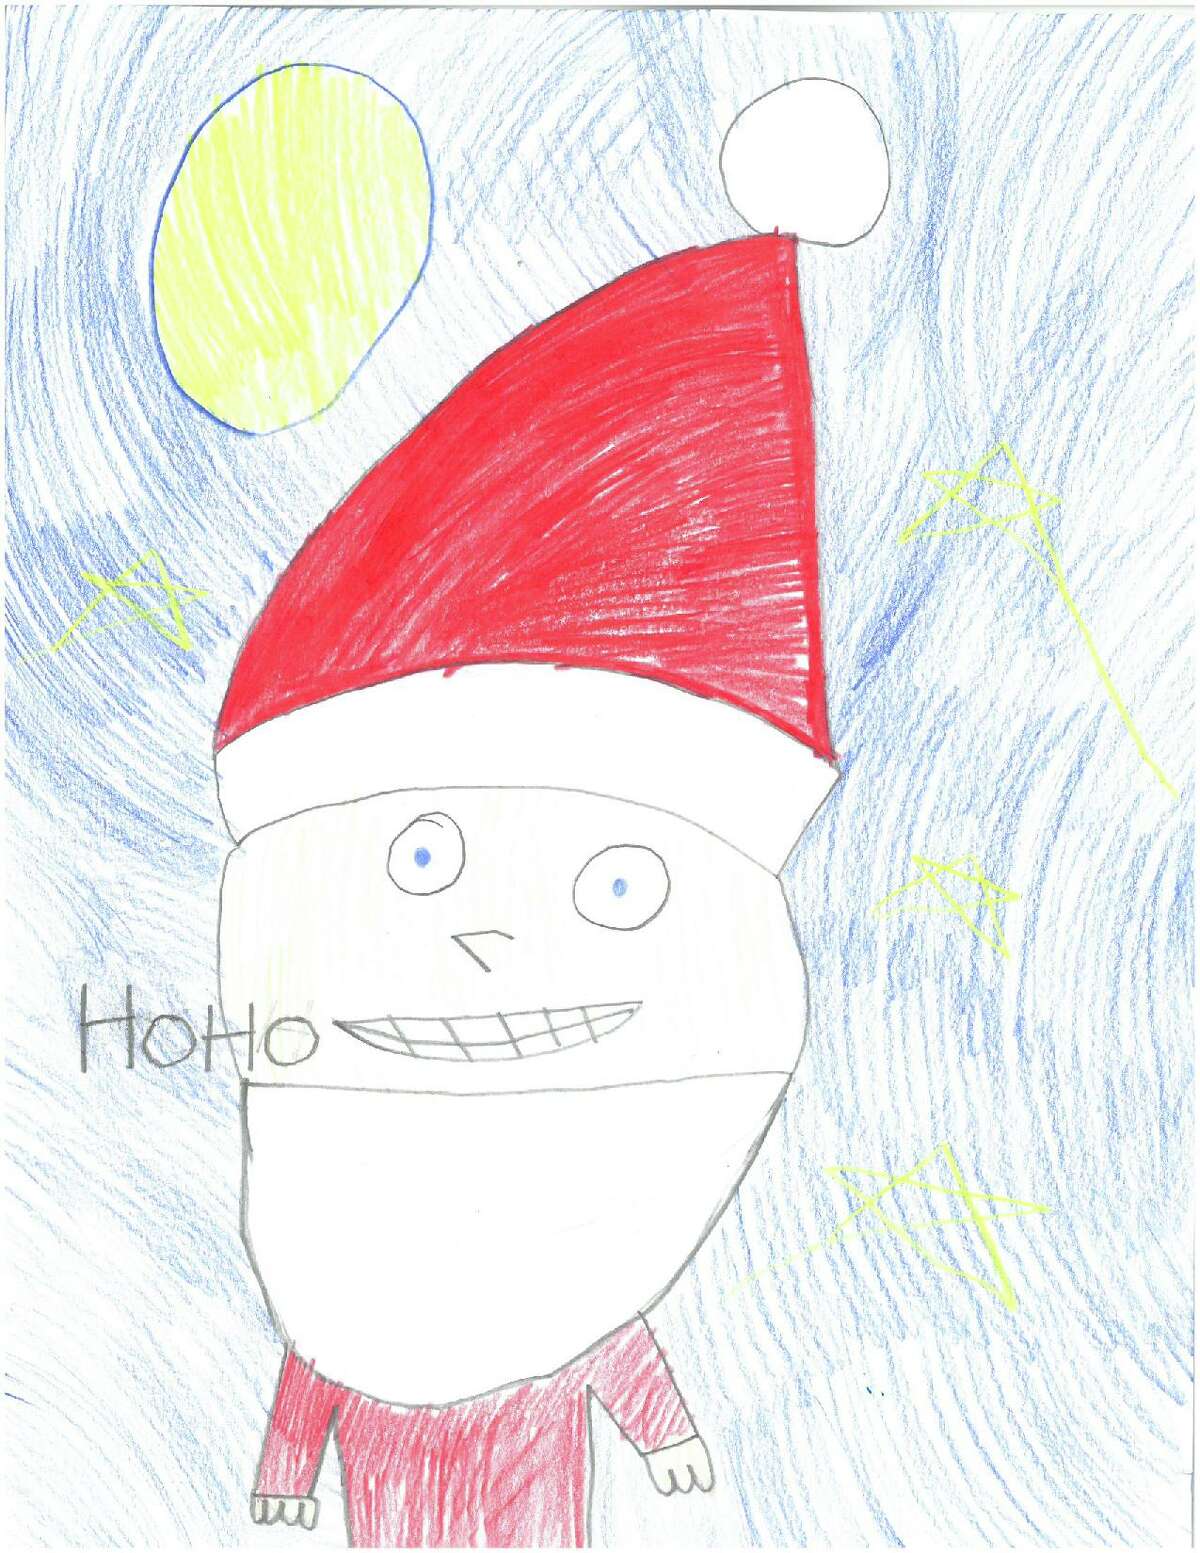 Evelyn Deyoe, of St. Pius X Catholic School, was the 1st grade winner in the 2018 Holiday Card Contest.